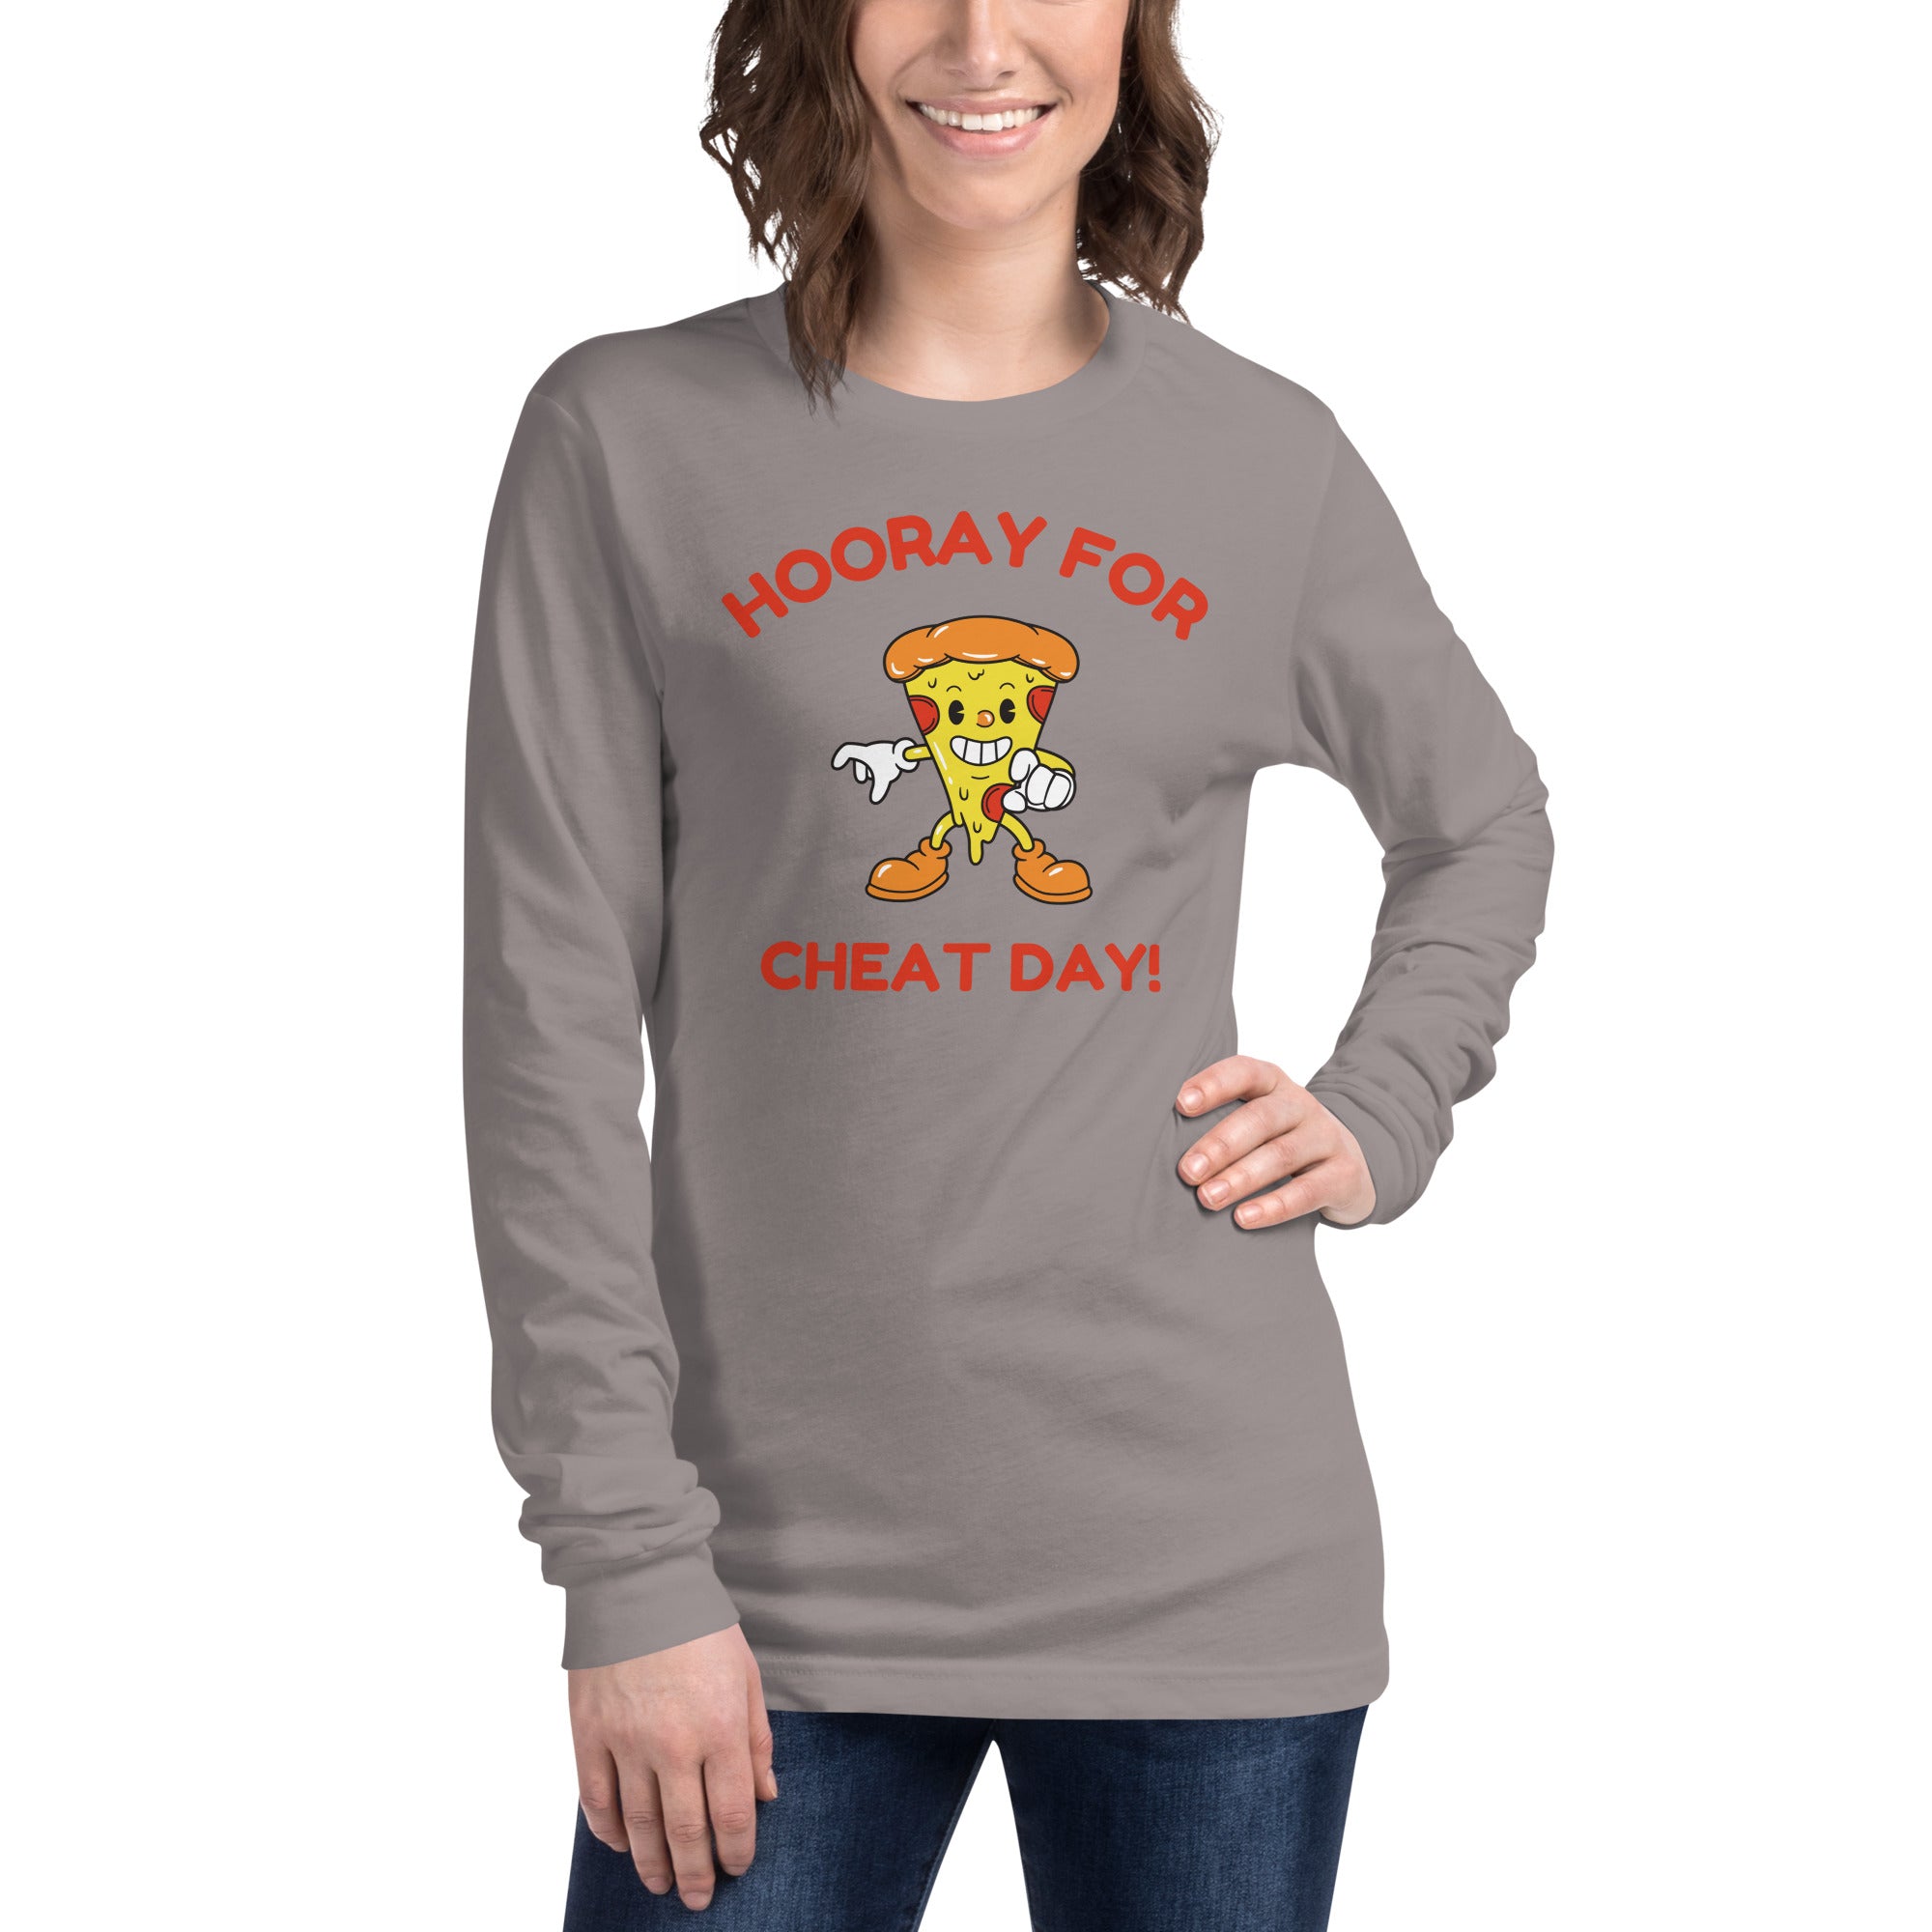 Hooray For Cheat Day! Women's Select Long Sleeve